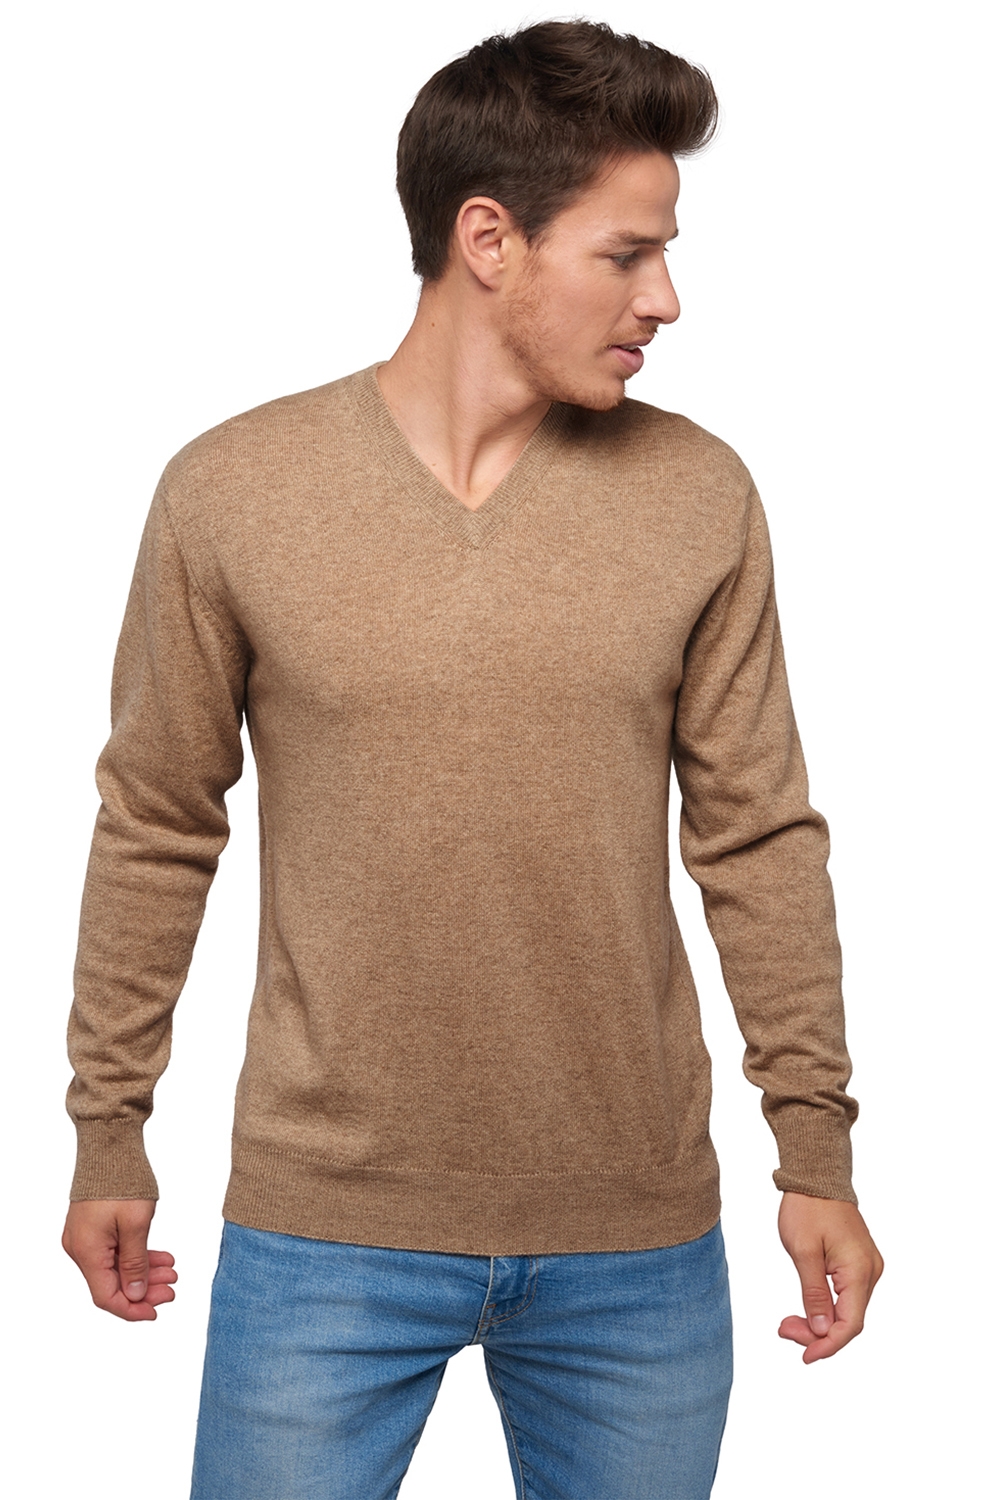 Cachemire Naturel pull homme epais natural poppy 4f natural brown s